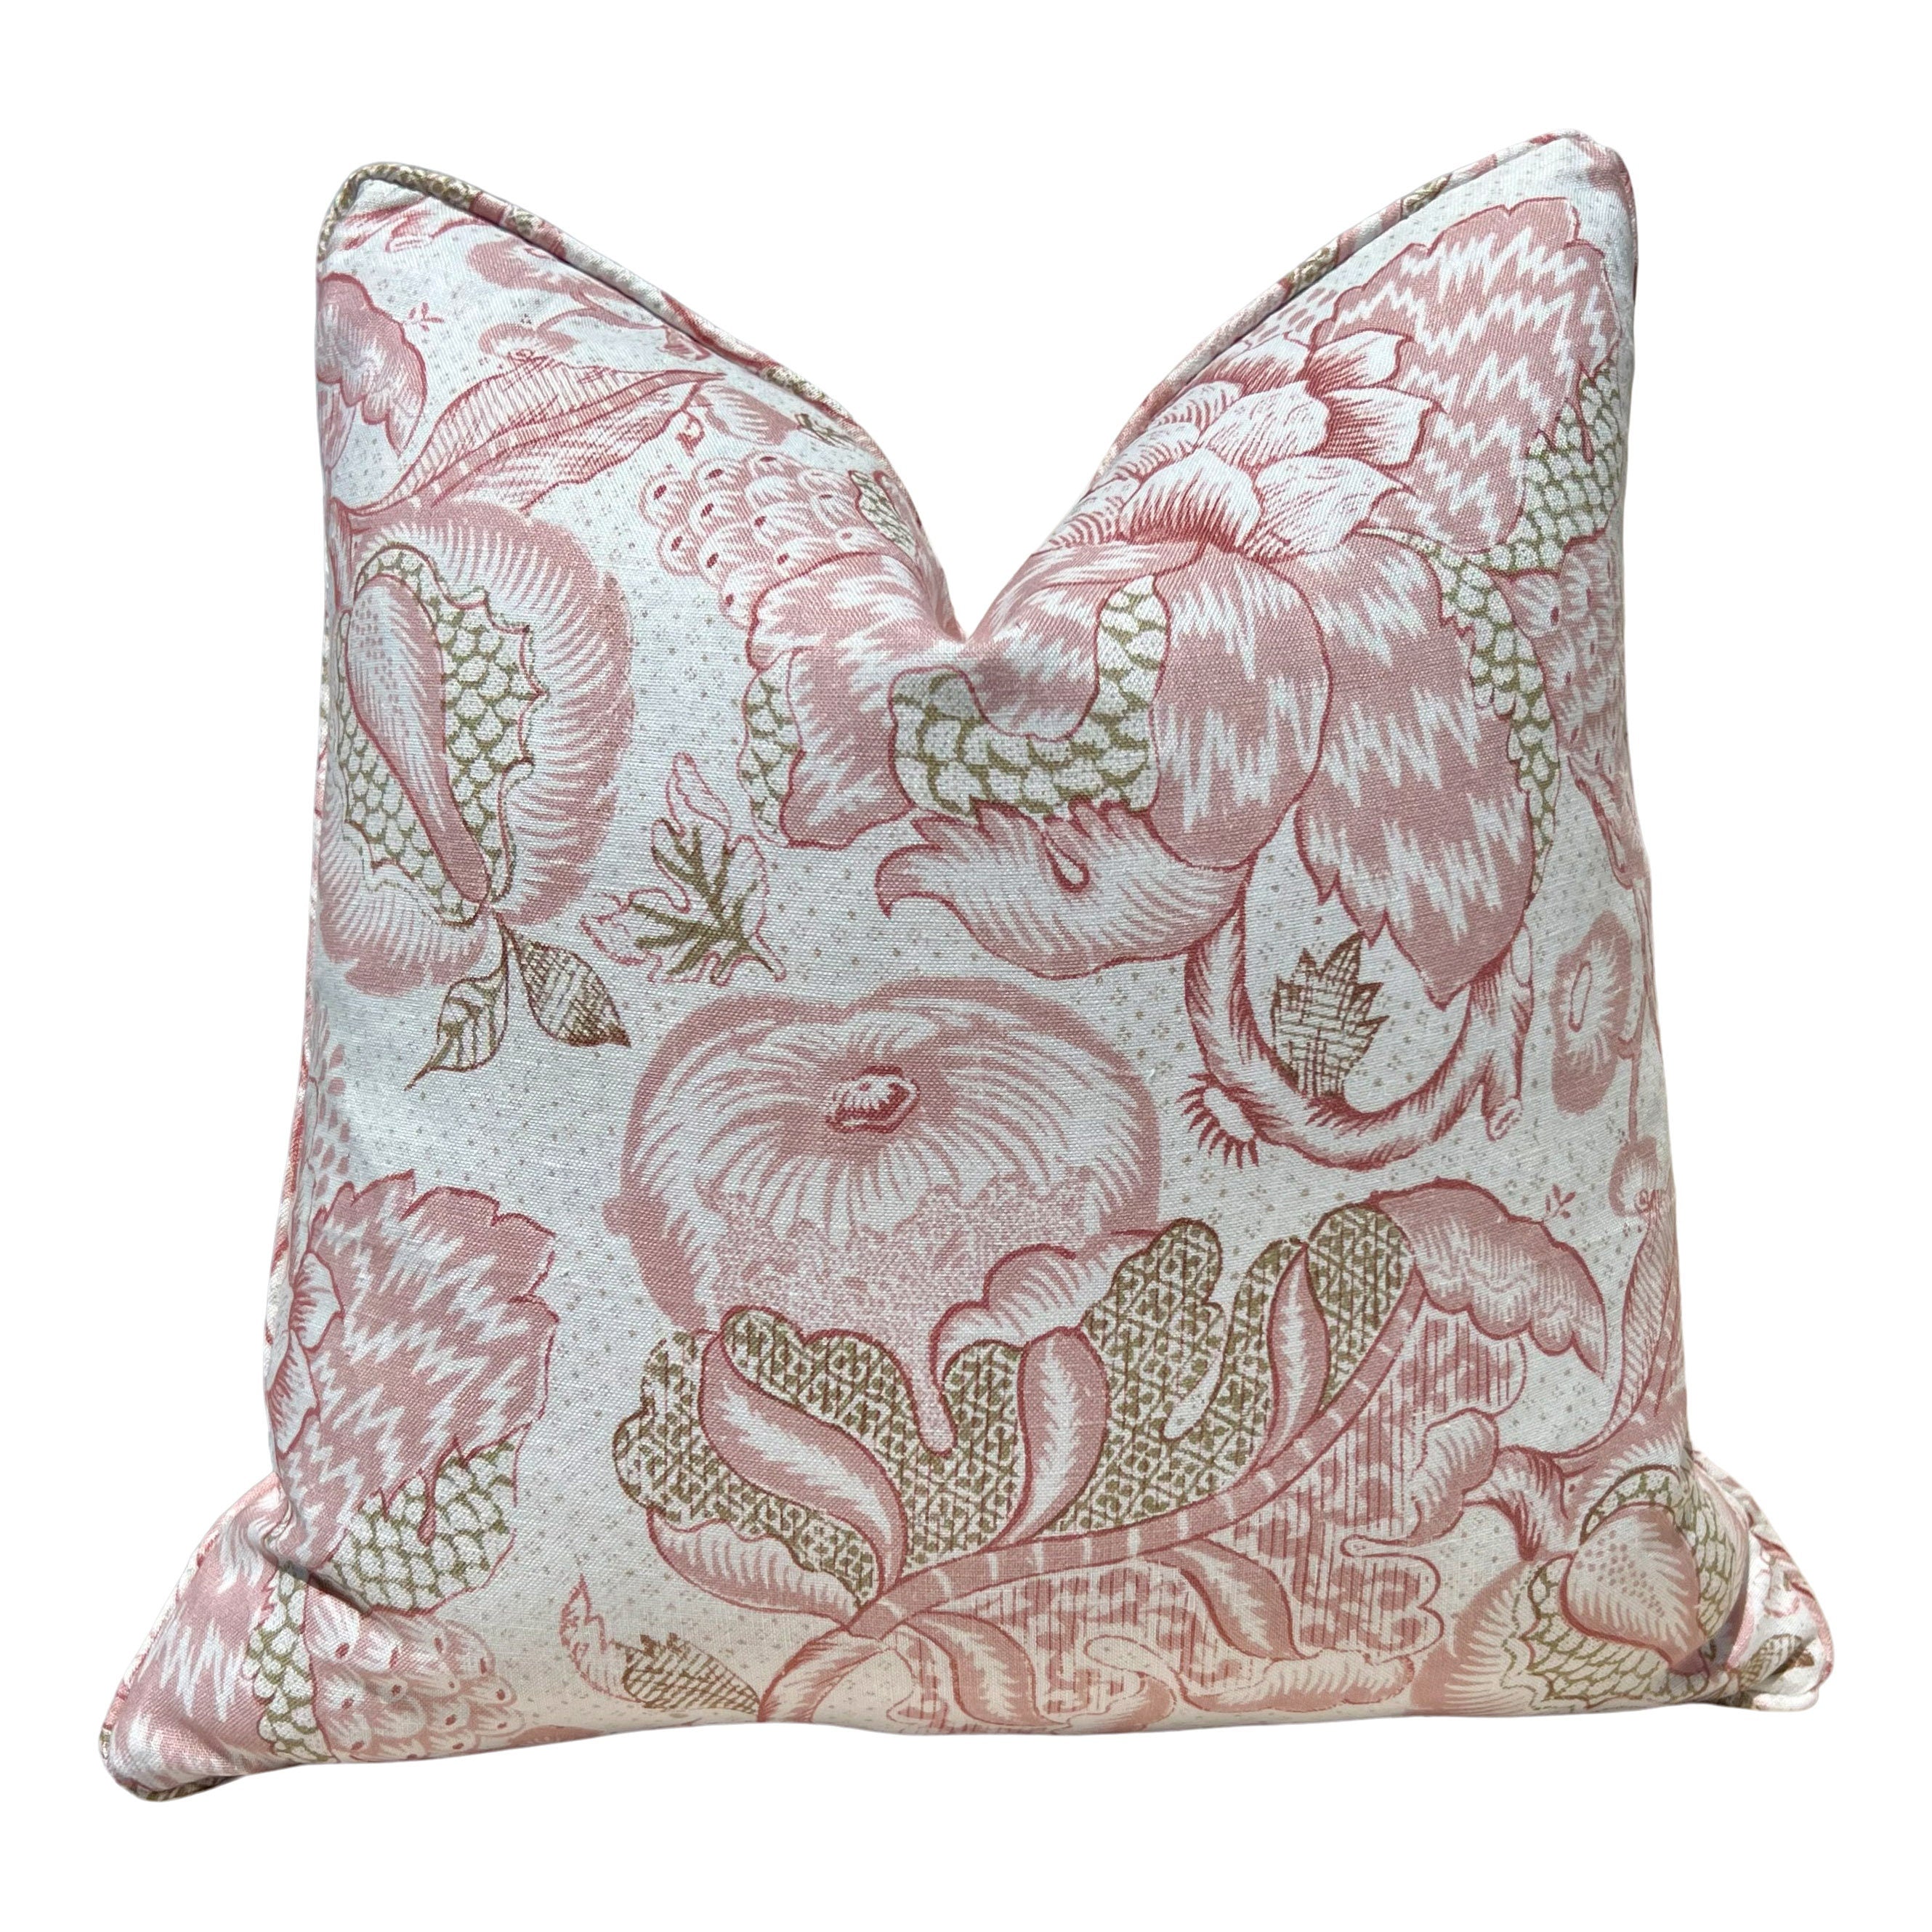 Thibaut Westmont Floral Pillow in Blush. Designer Pillows // Floral Pillows in Pink and Green // High End Linen Pillows // Euro Sham Cover